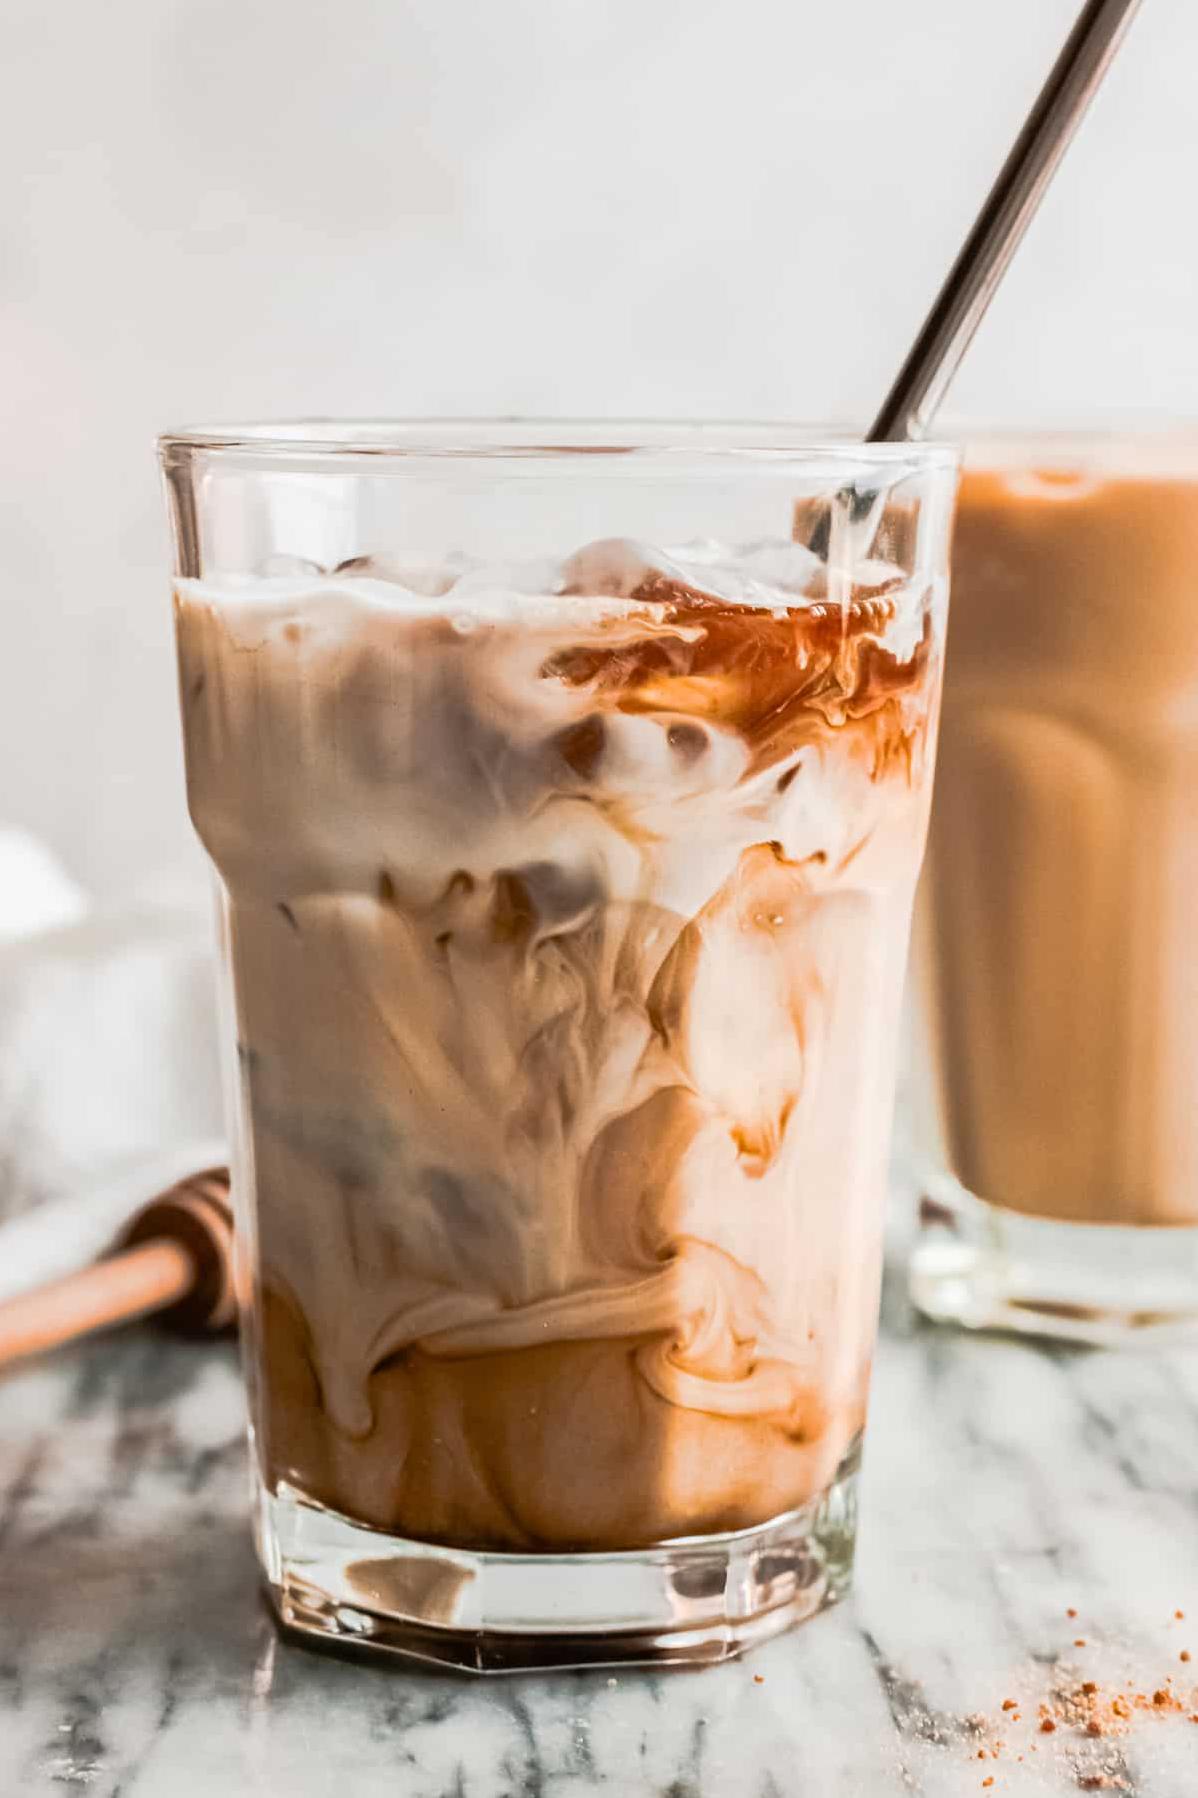 Wake Up Your Taste Buds with This Homemade Iced Espresso